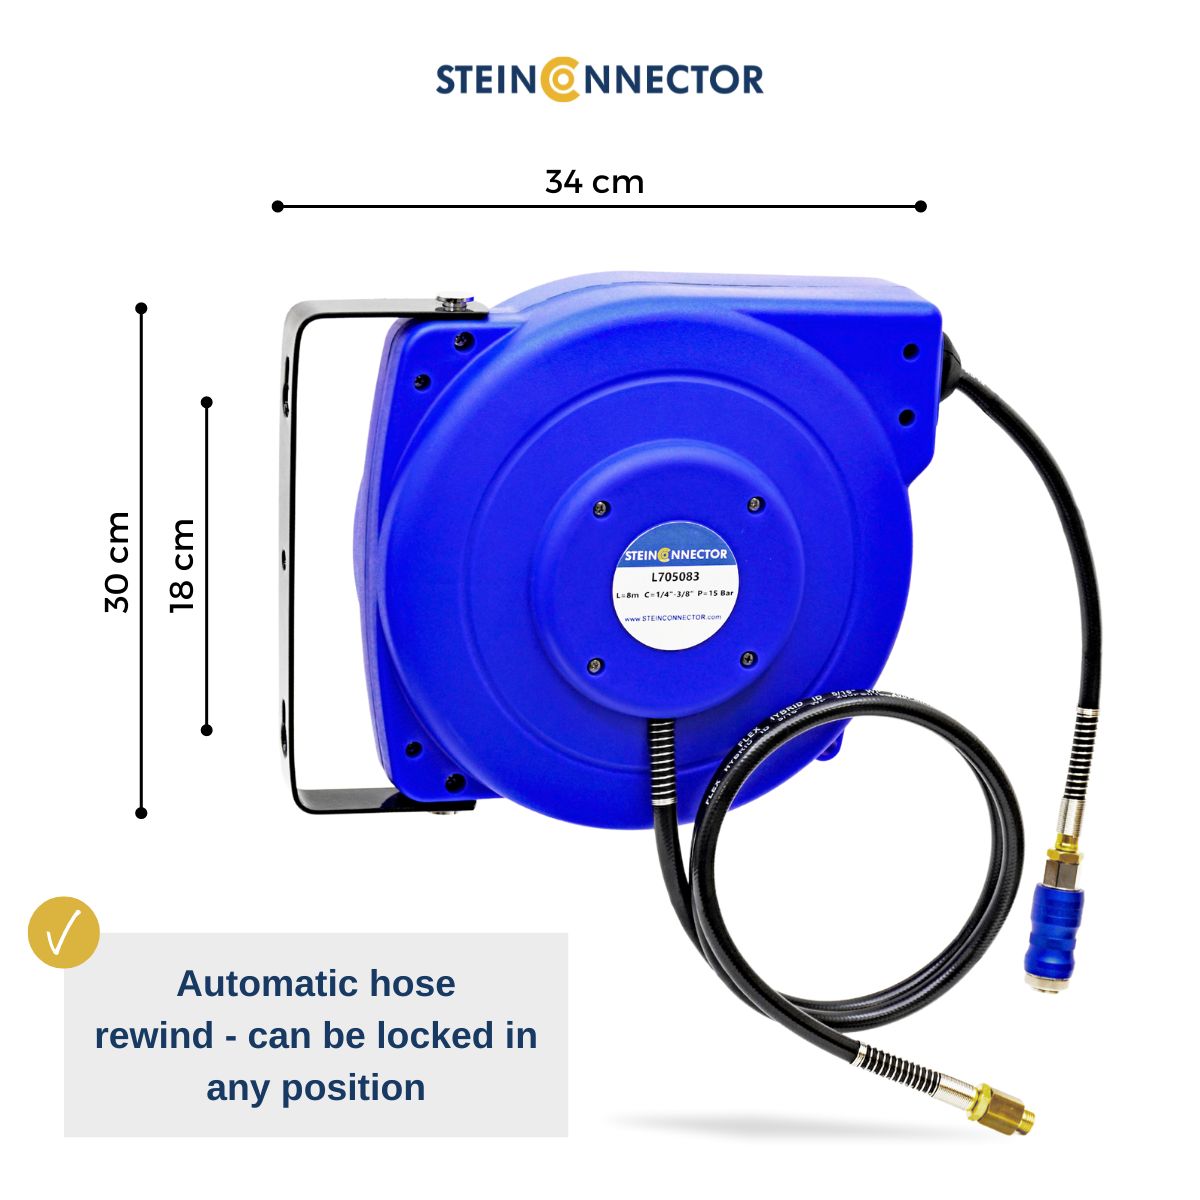 Professional automatic hose reel in industrial quality - Premium workshop equipment for compressed air and pneumatic tools - automatic hose box with wall bracket in 8 and 15 m length with flex hose & BiTec compressed air safety coupling